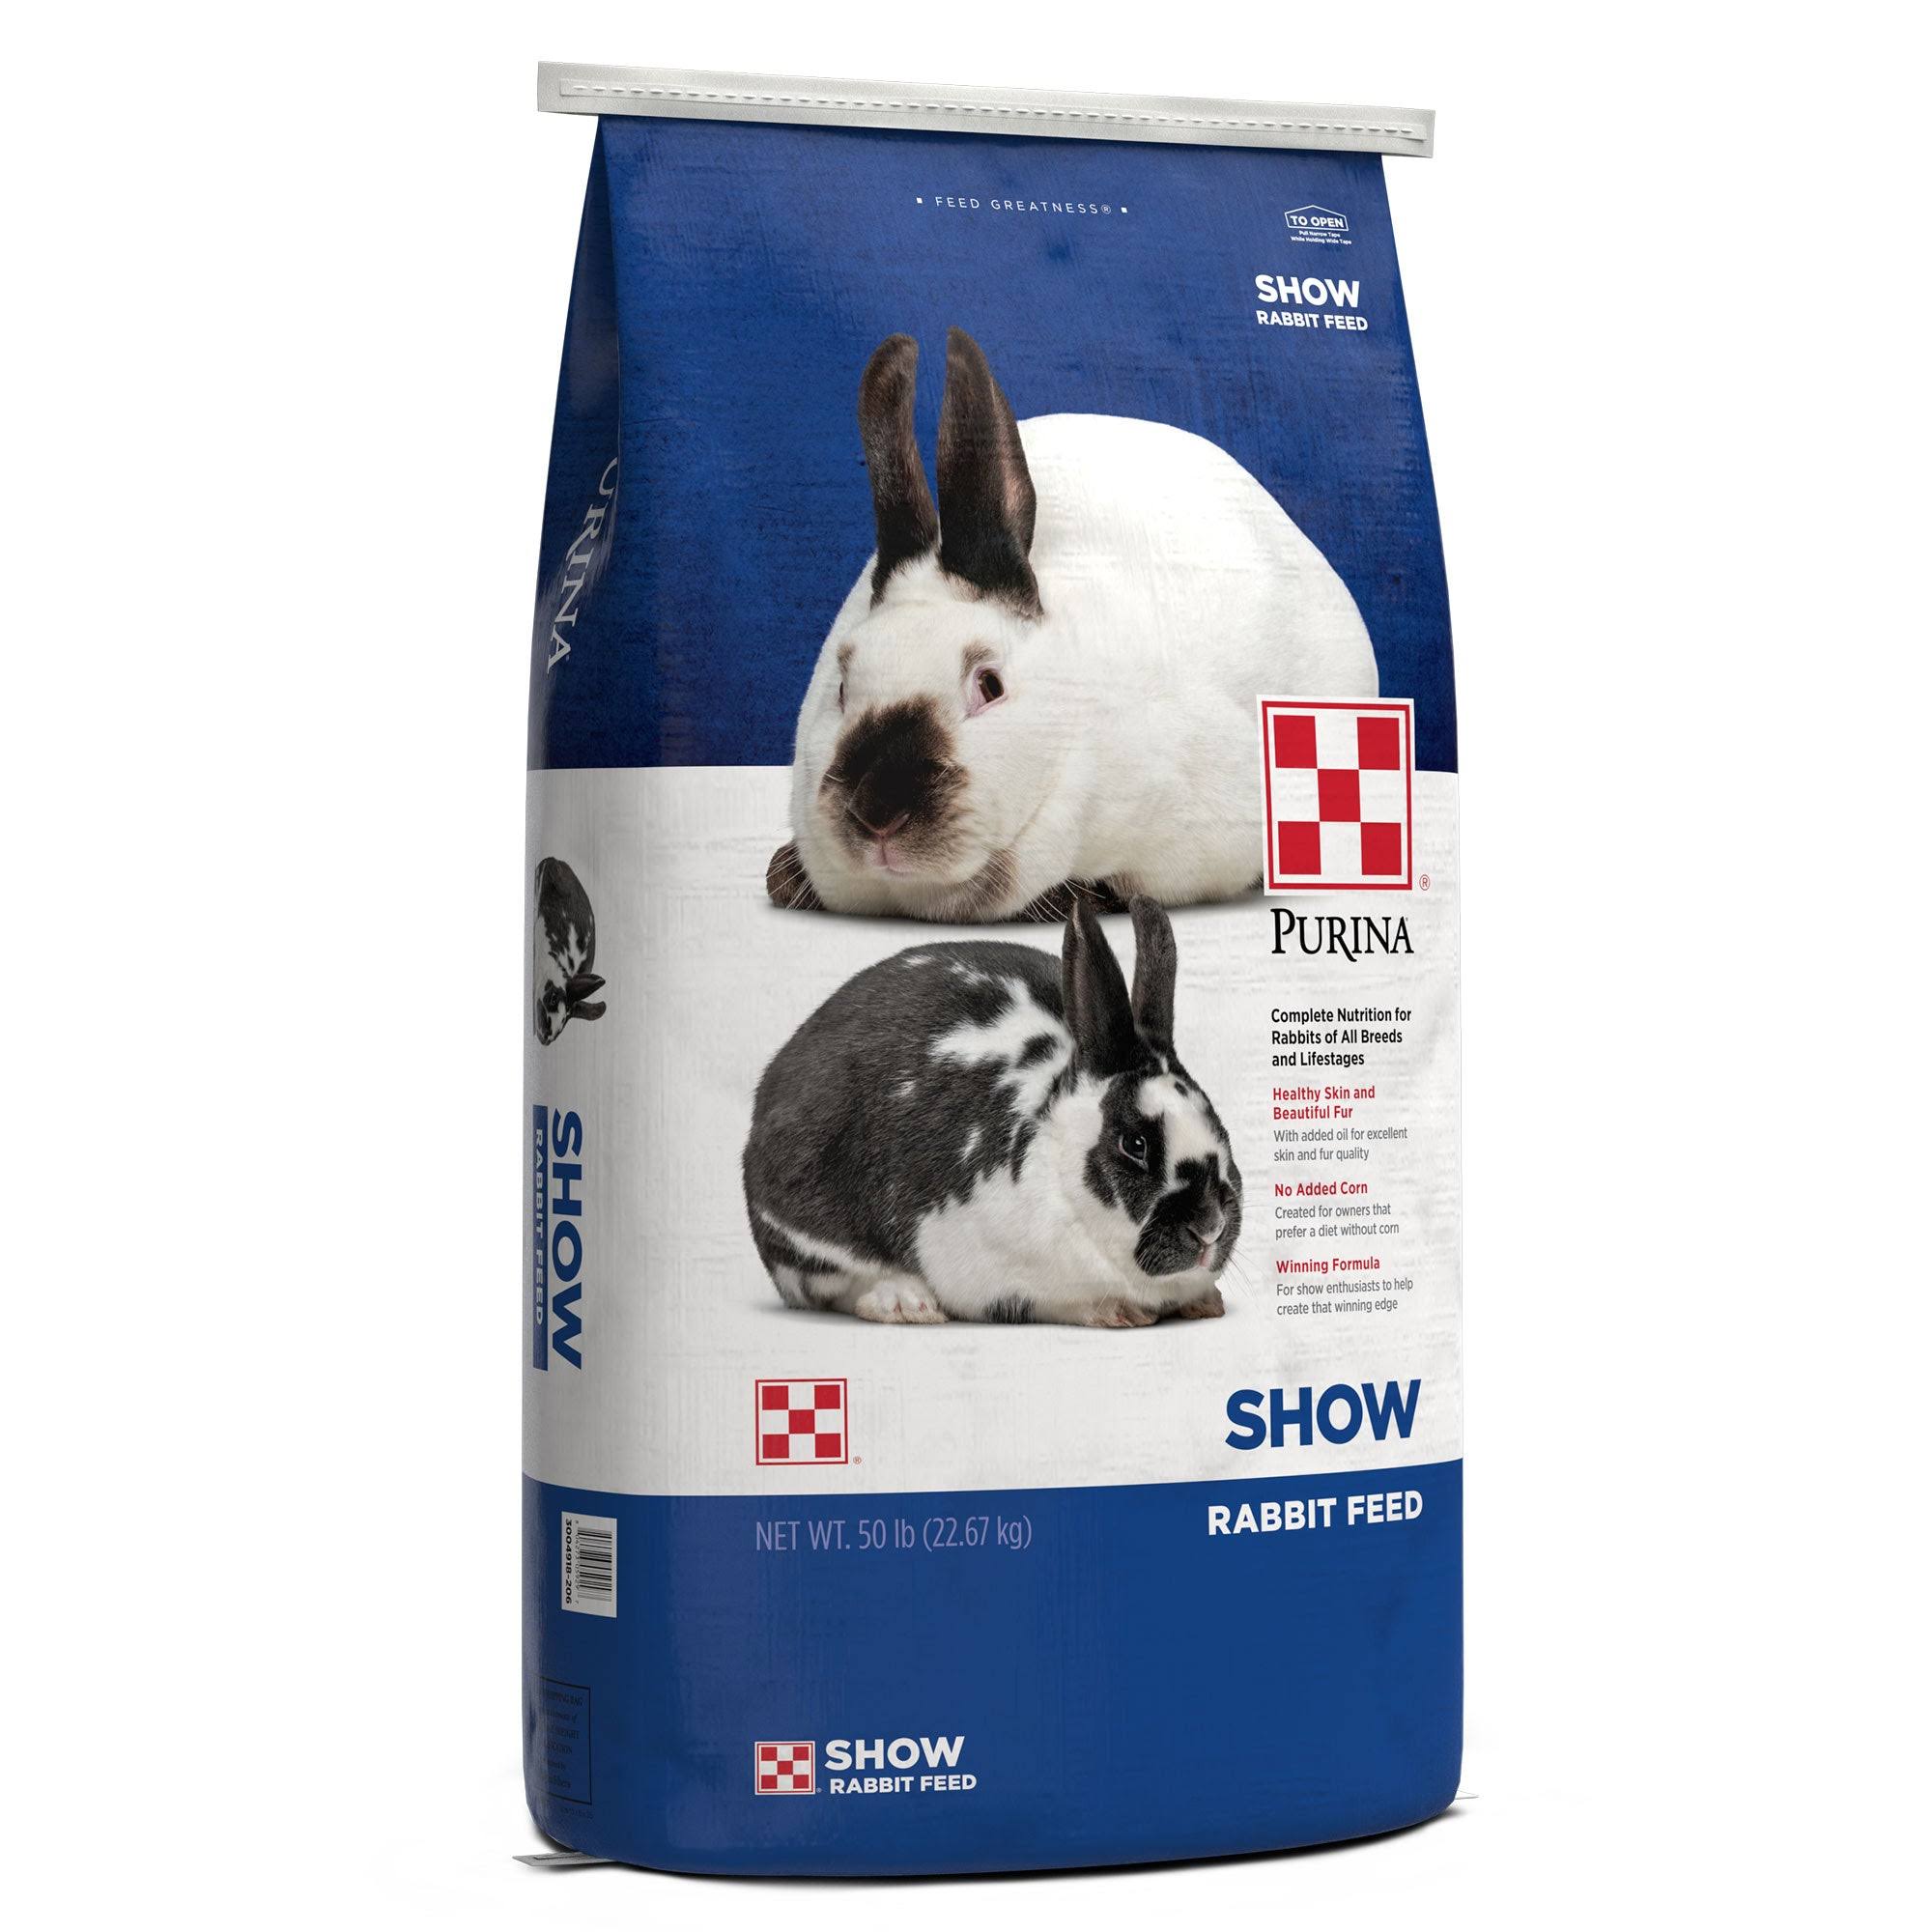 Purina Professional Complete Rabbit Feed - 50lbs